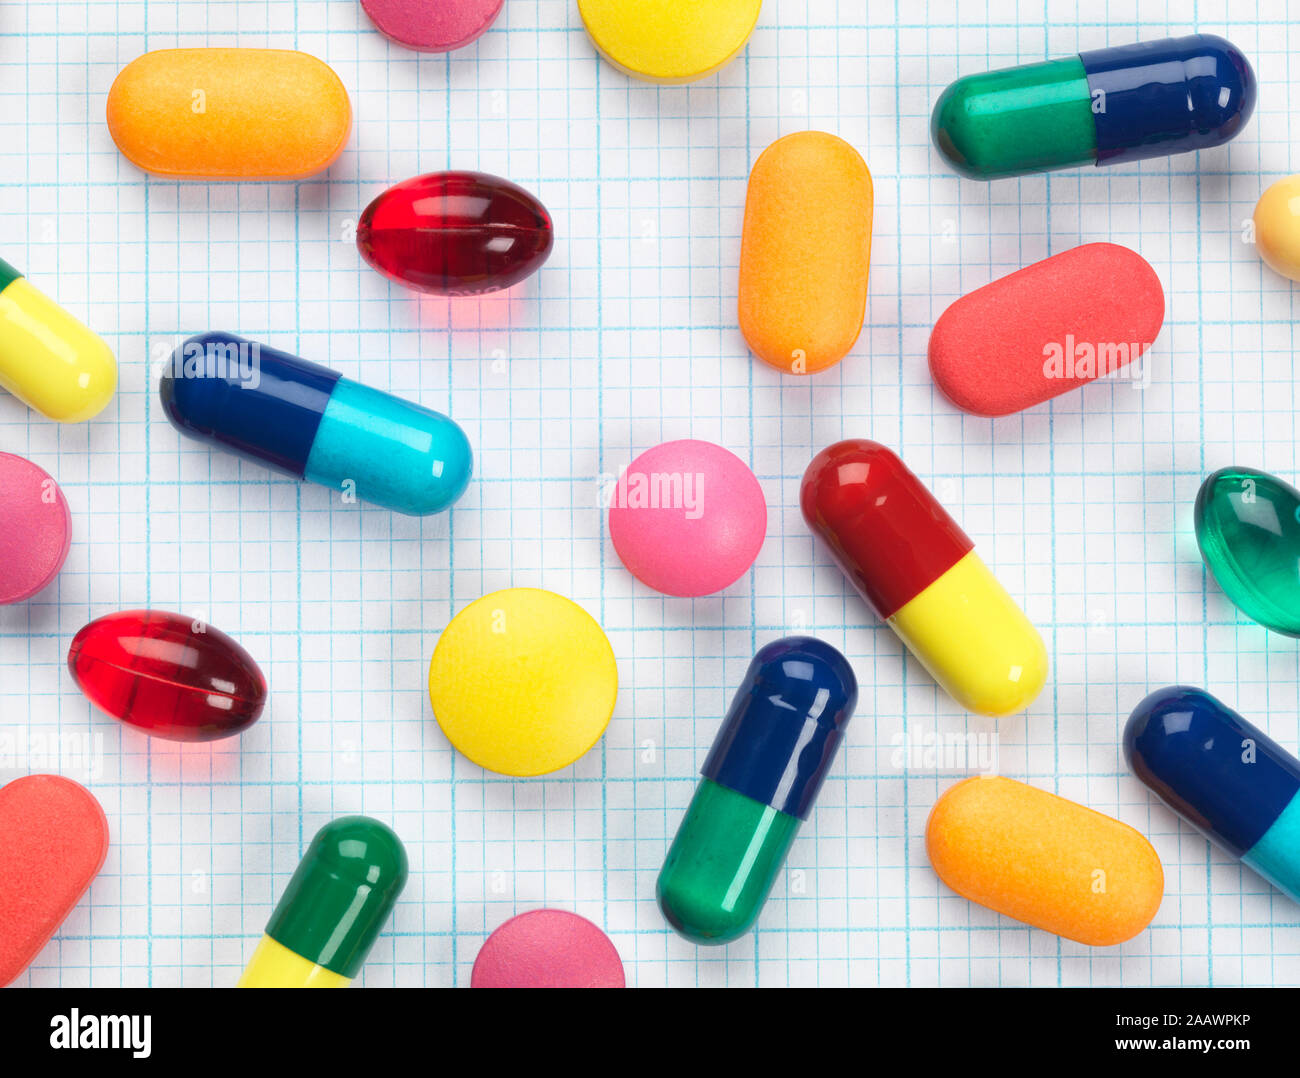 High angle view of various colorful medicines on graph paper Stock Photo